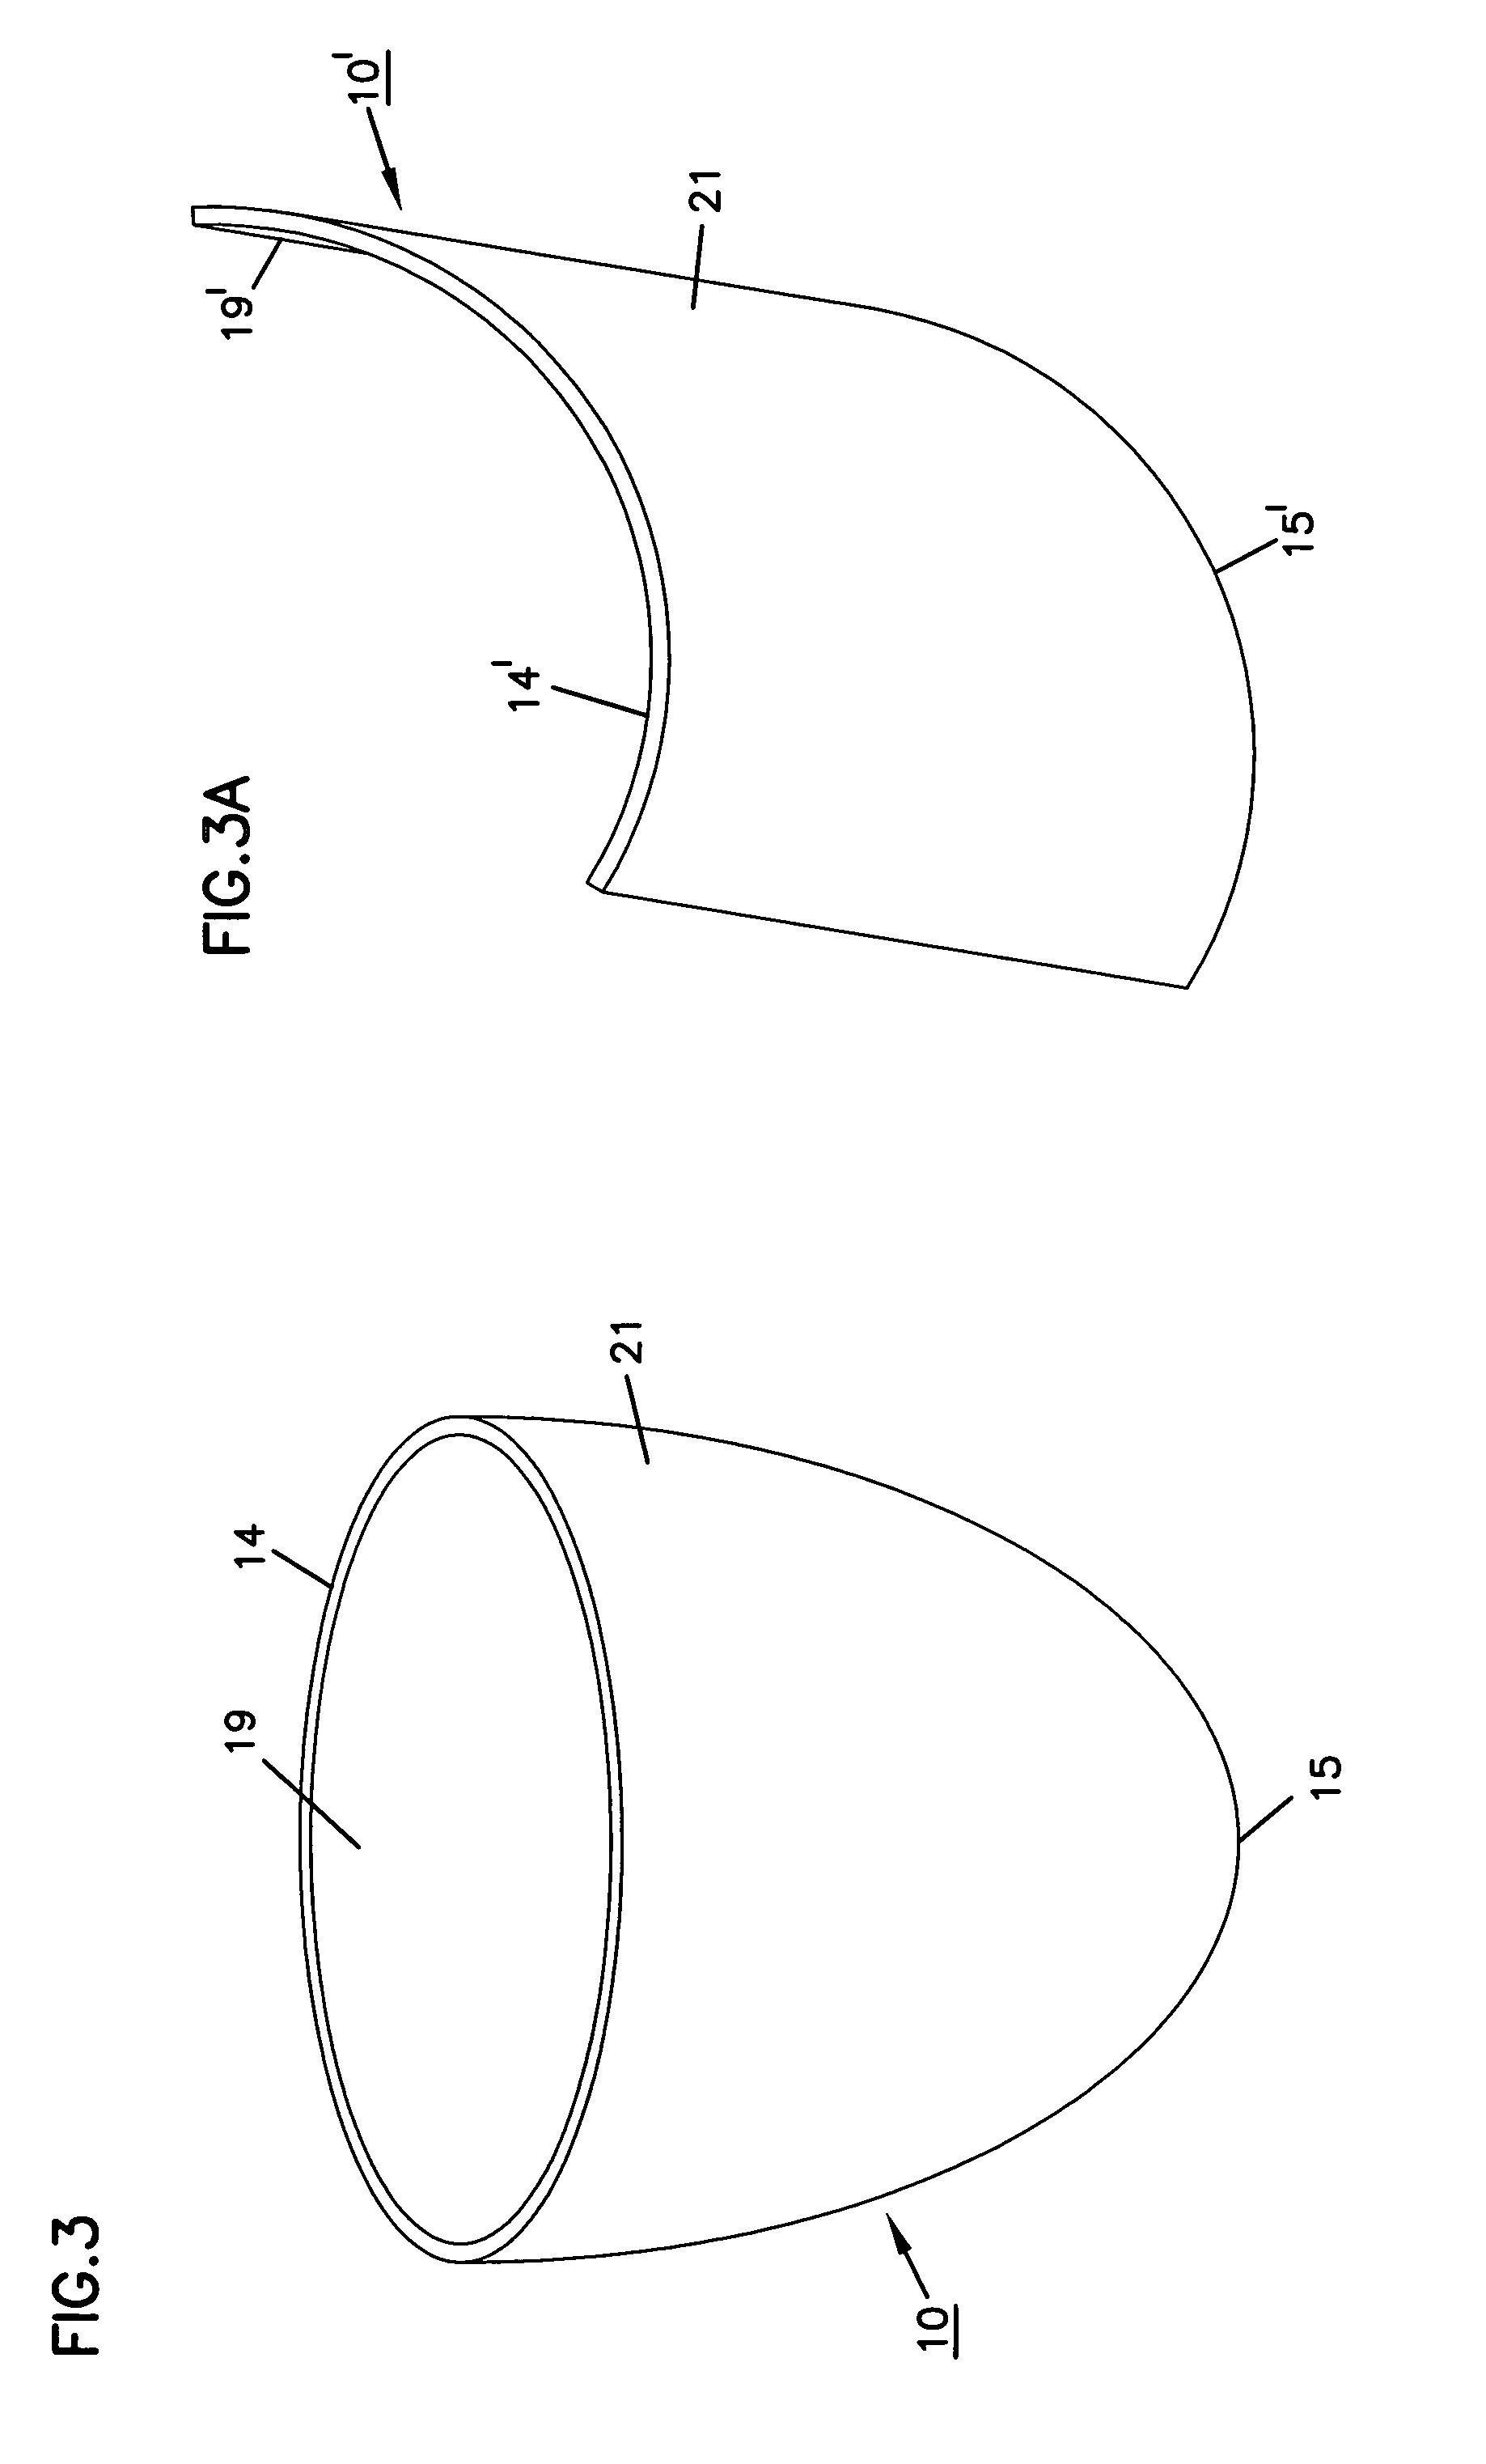 Cardiac wall tension relief device and method